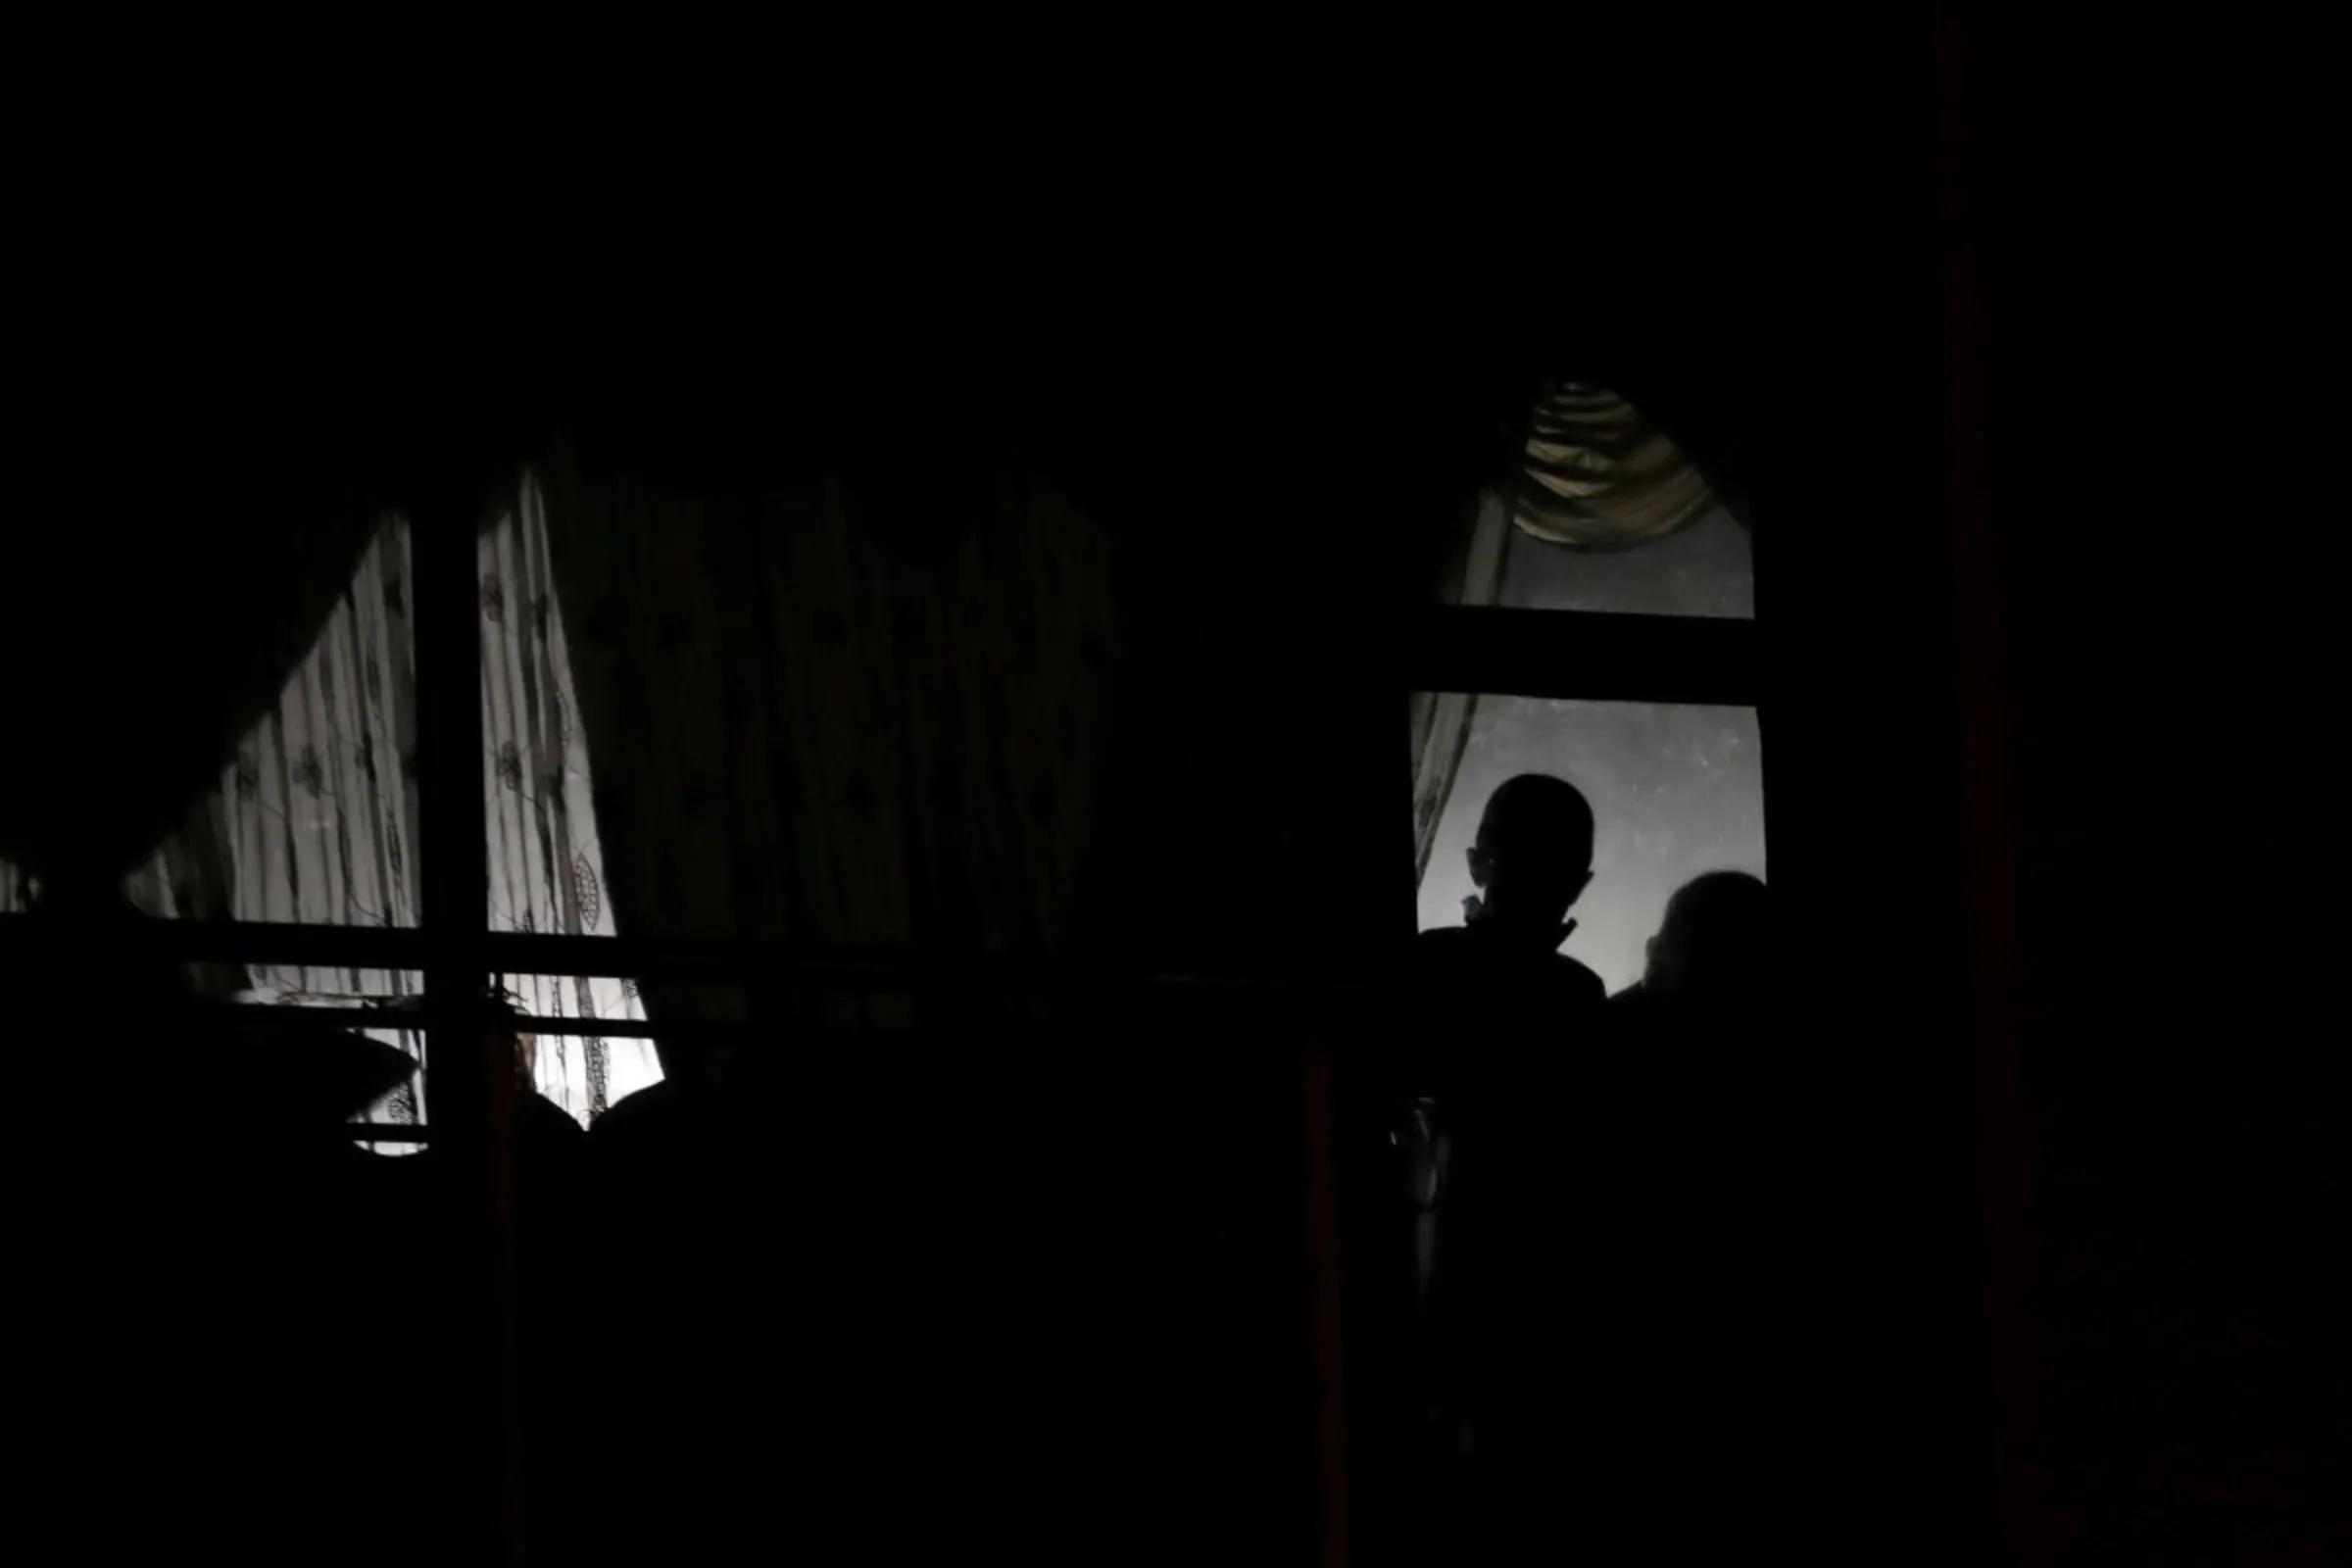 A resident looks outside the window amid a nationwide coronavirus disease (COVID-19) lockdown in Mayfair, South Africa May 1, 2020. REUTERS/Siphiwe Sibeko